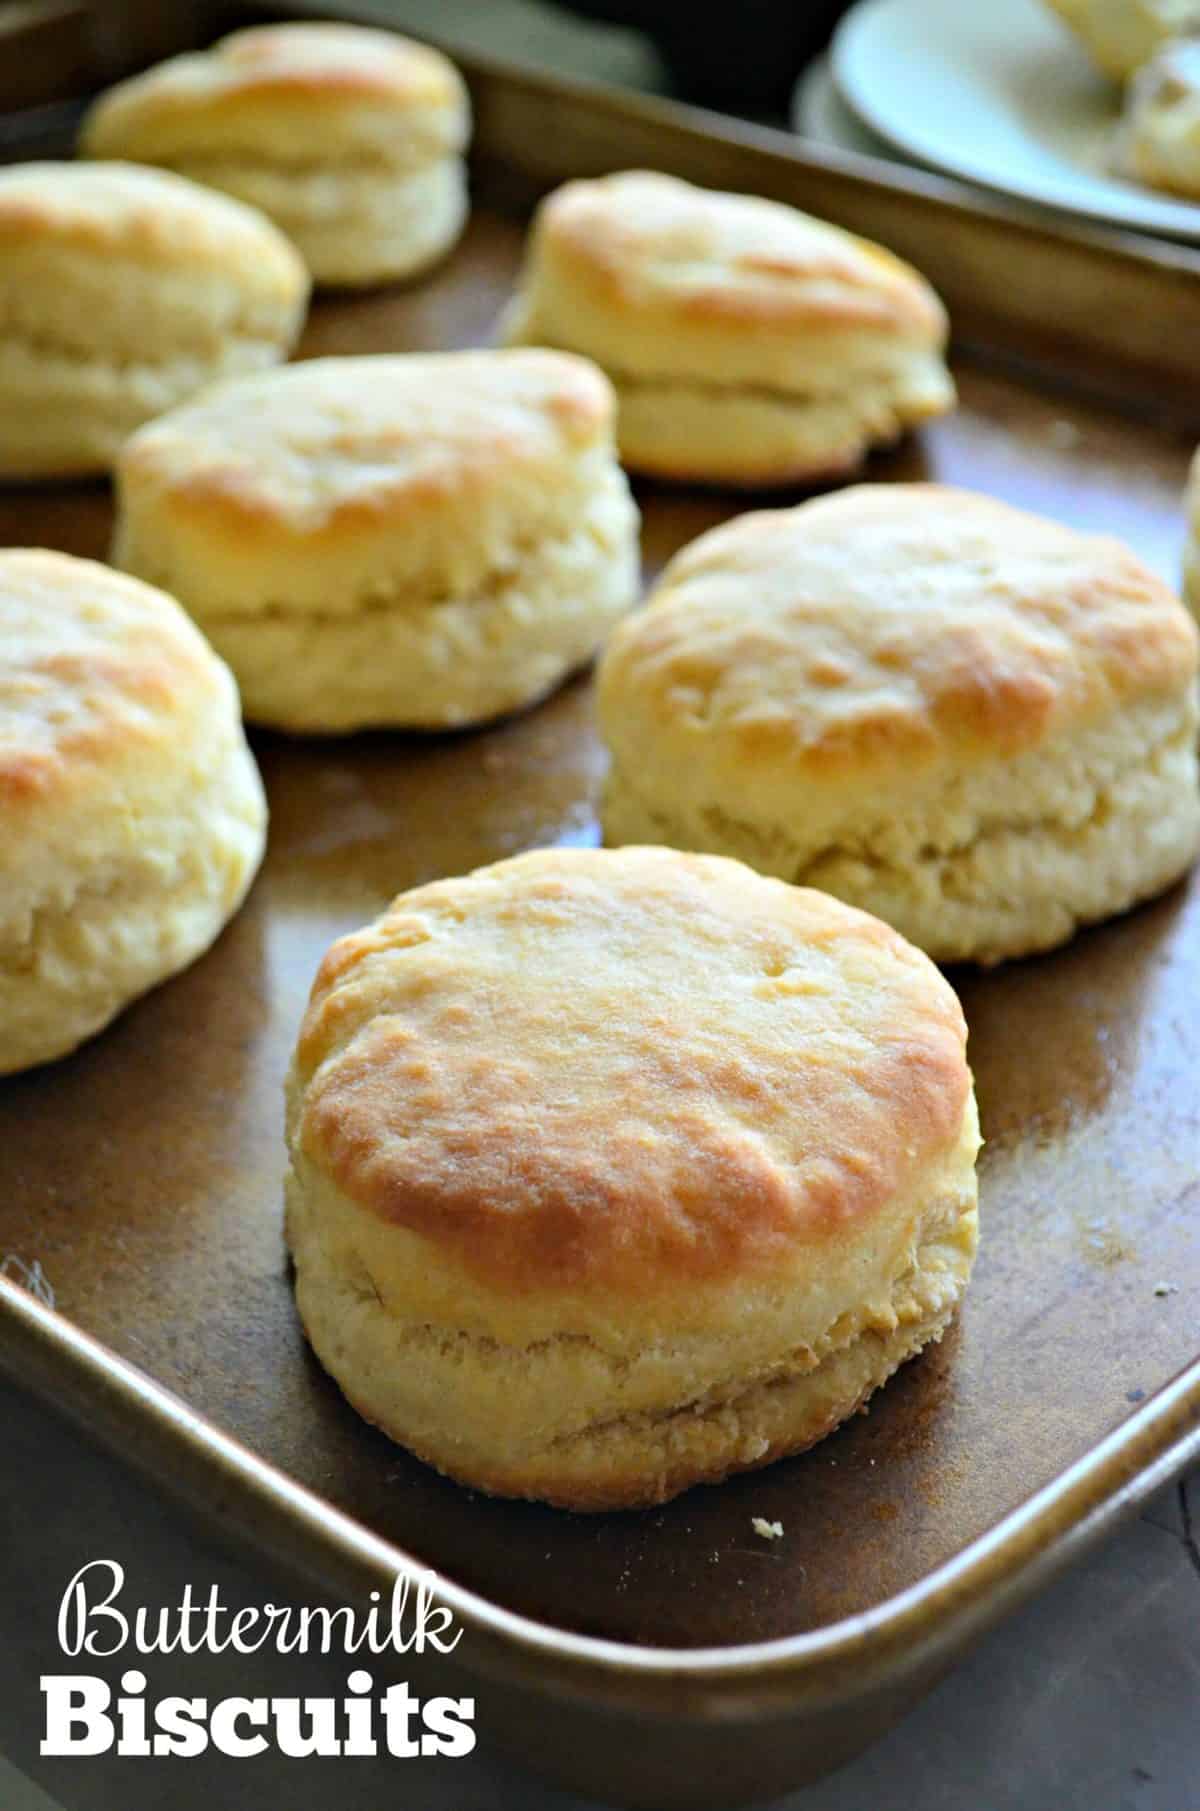 Buttermilk Biscuits on a baking sheet.